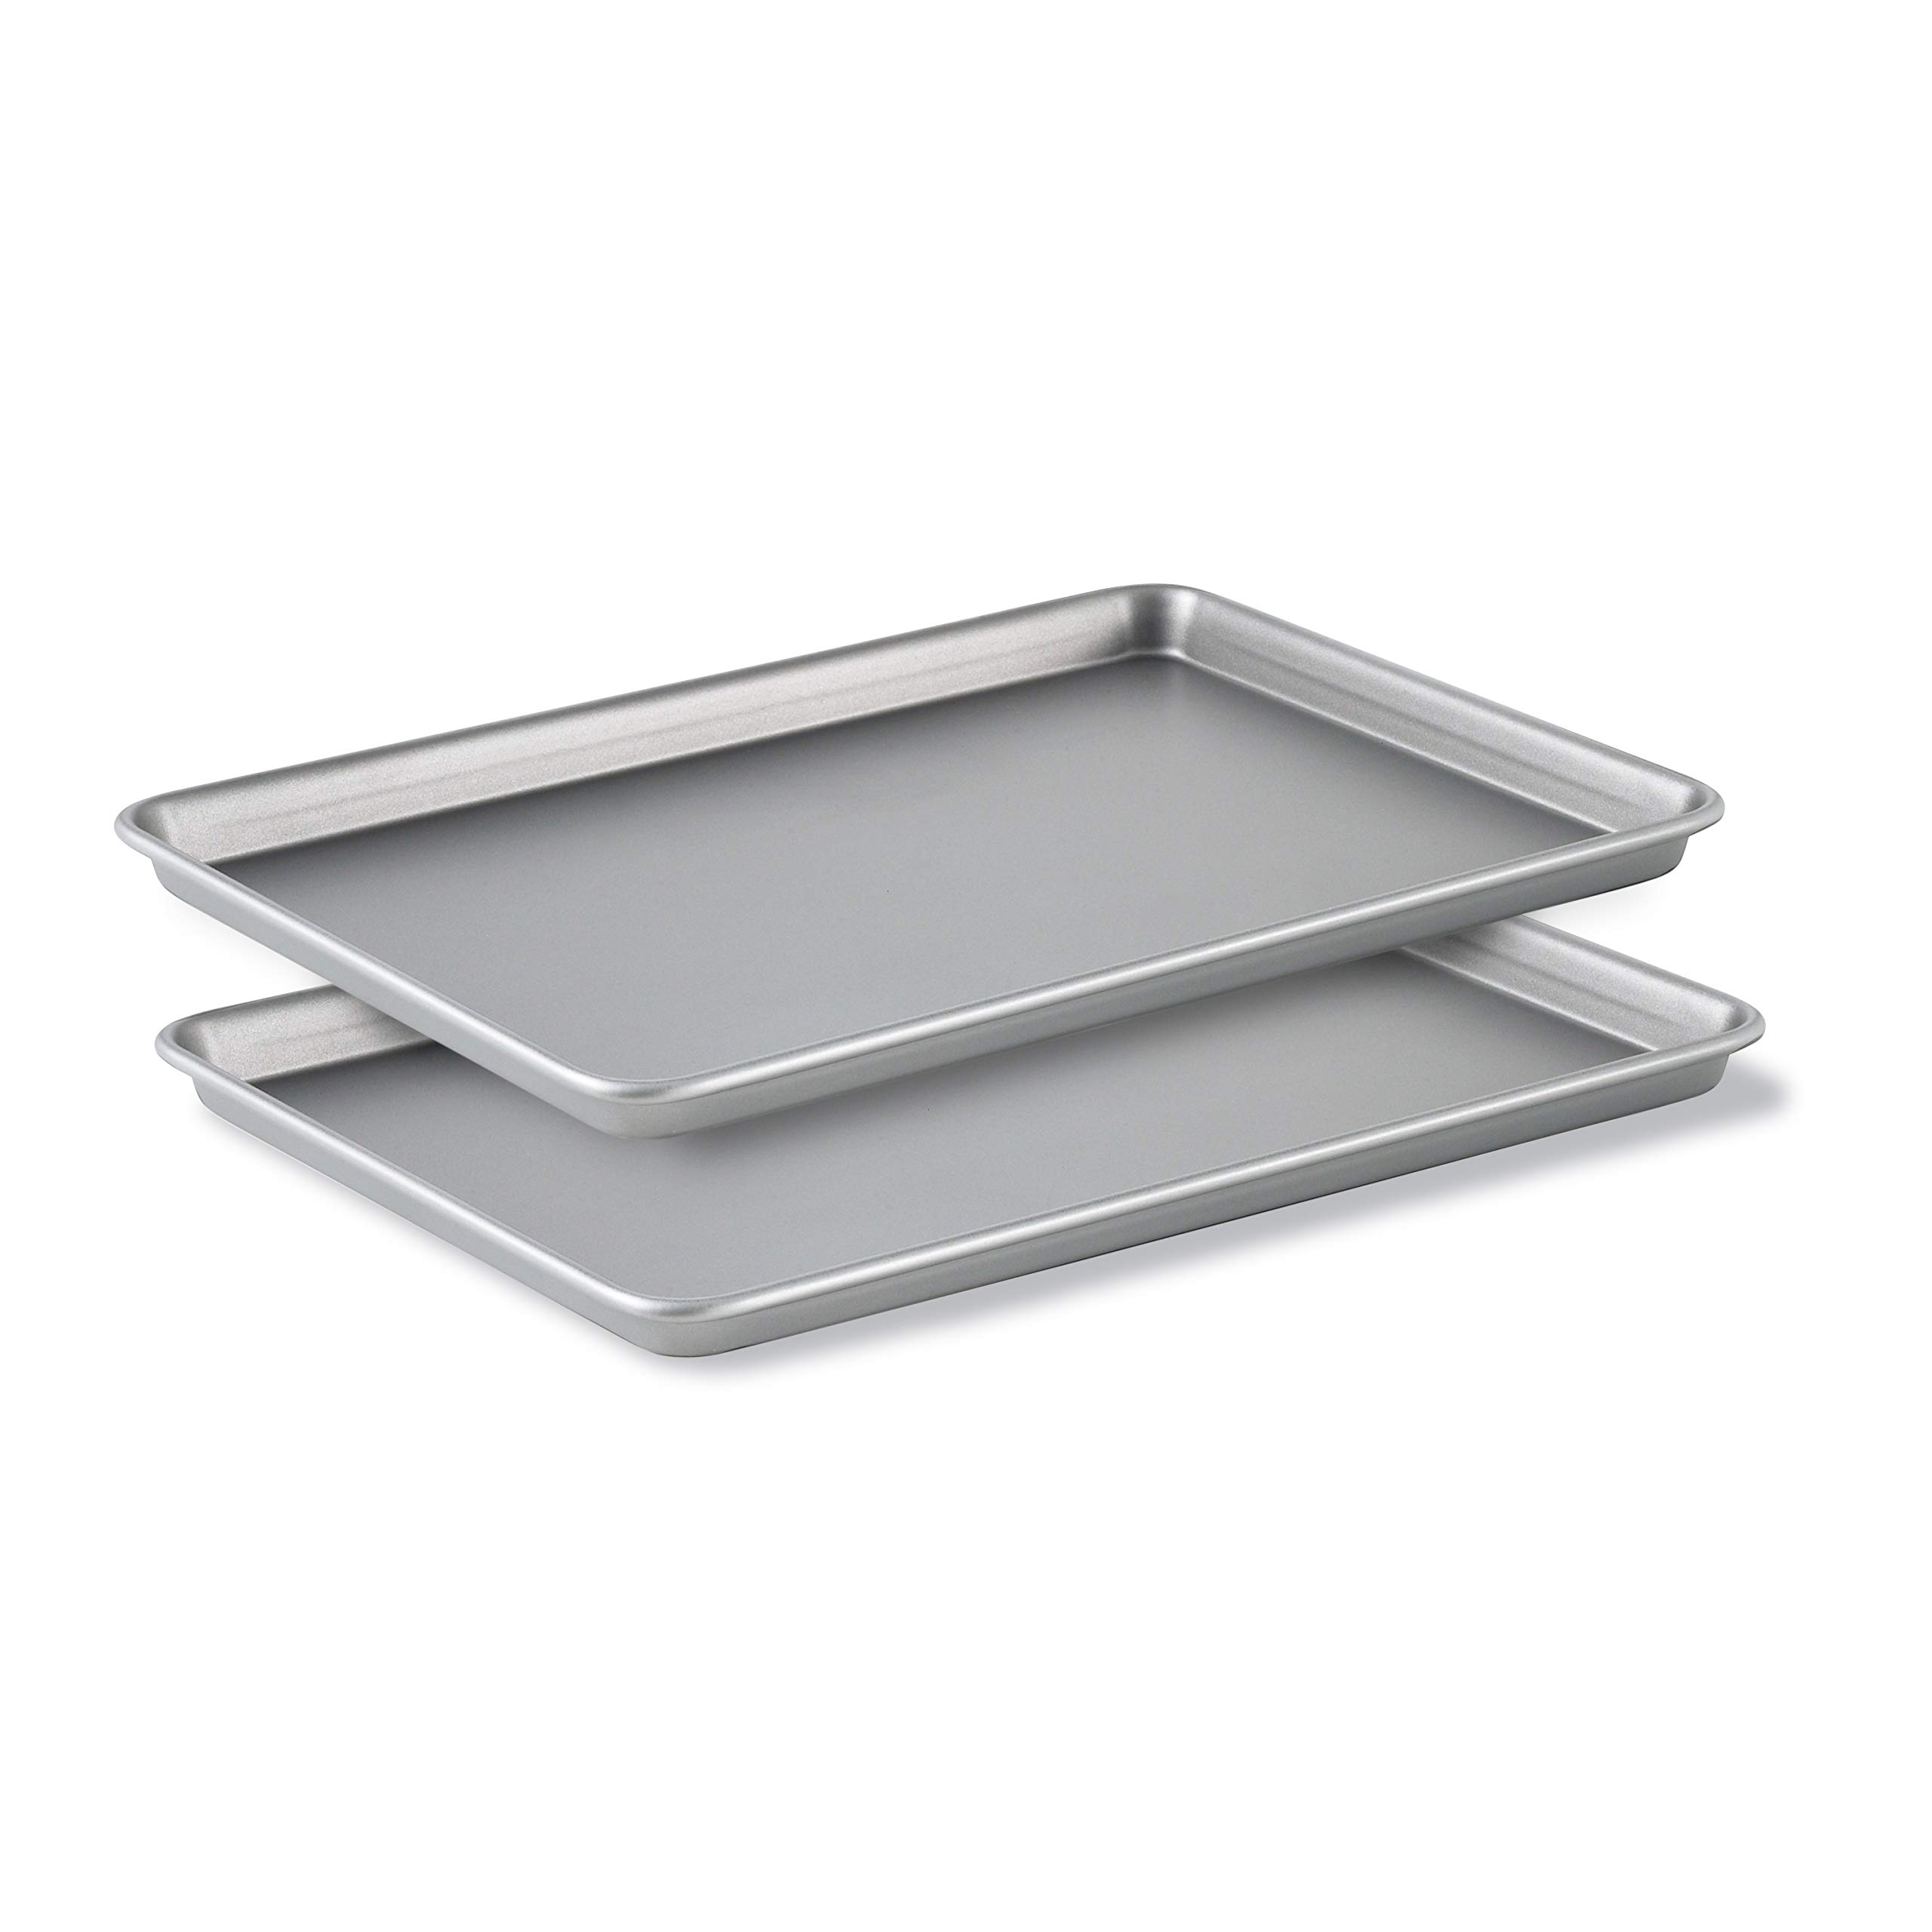 Calphalon Pizza Pan with Holes, 16-Inch Nonstick Round Pizza Crisper, Dishwasher Safe, Silver & Baking Sheets, Nonstick Baking Pans Set for Cookies and Cakes, 12 x 17 in, Set of 2, Silver